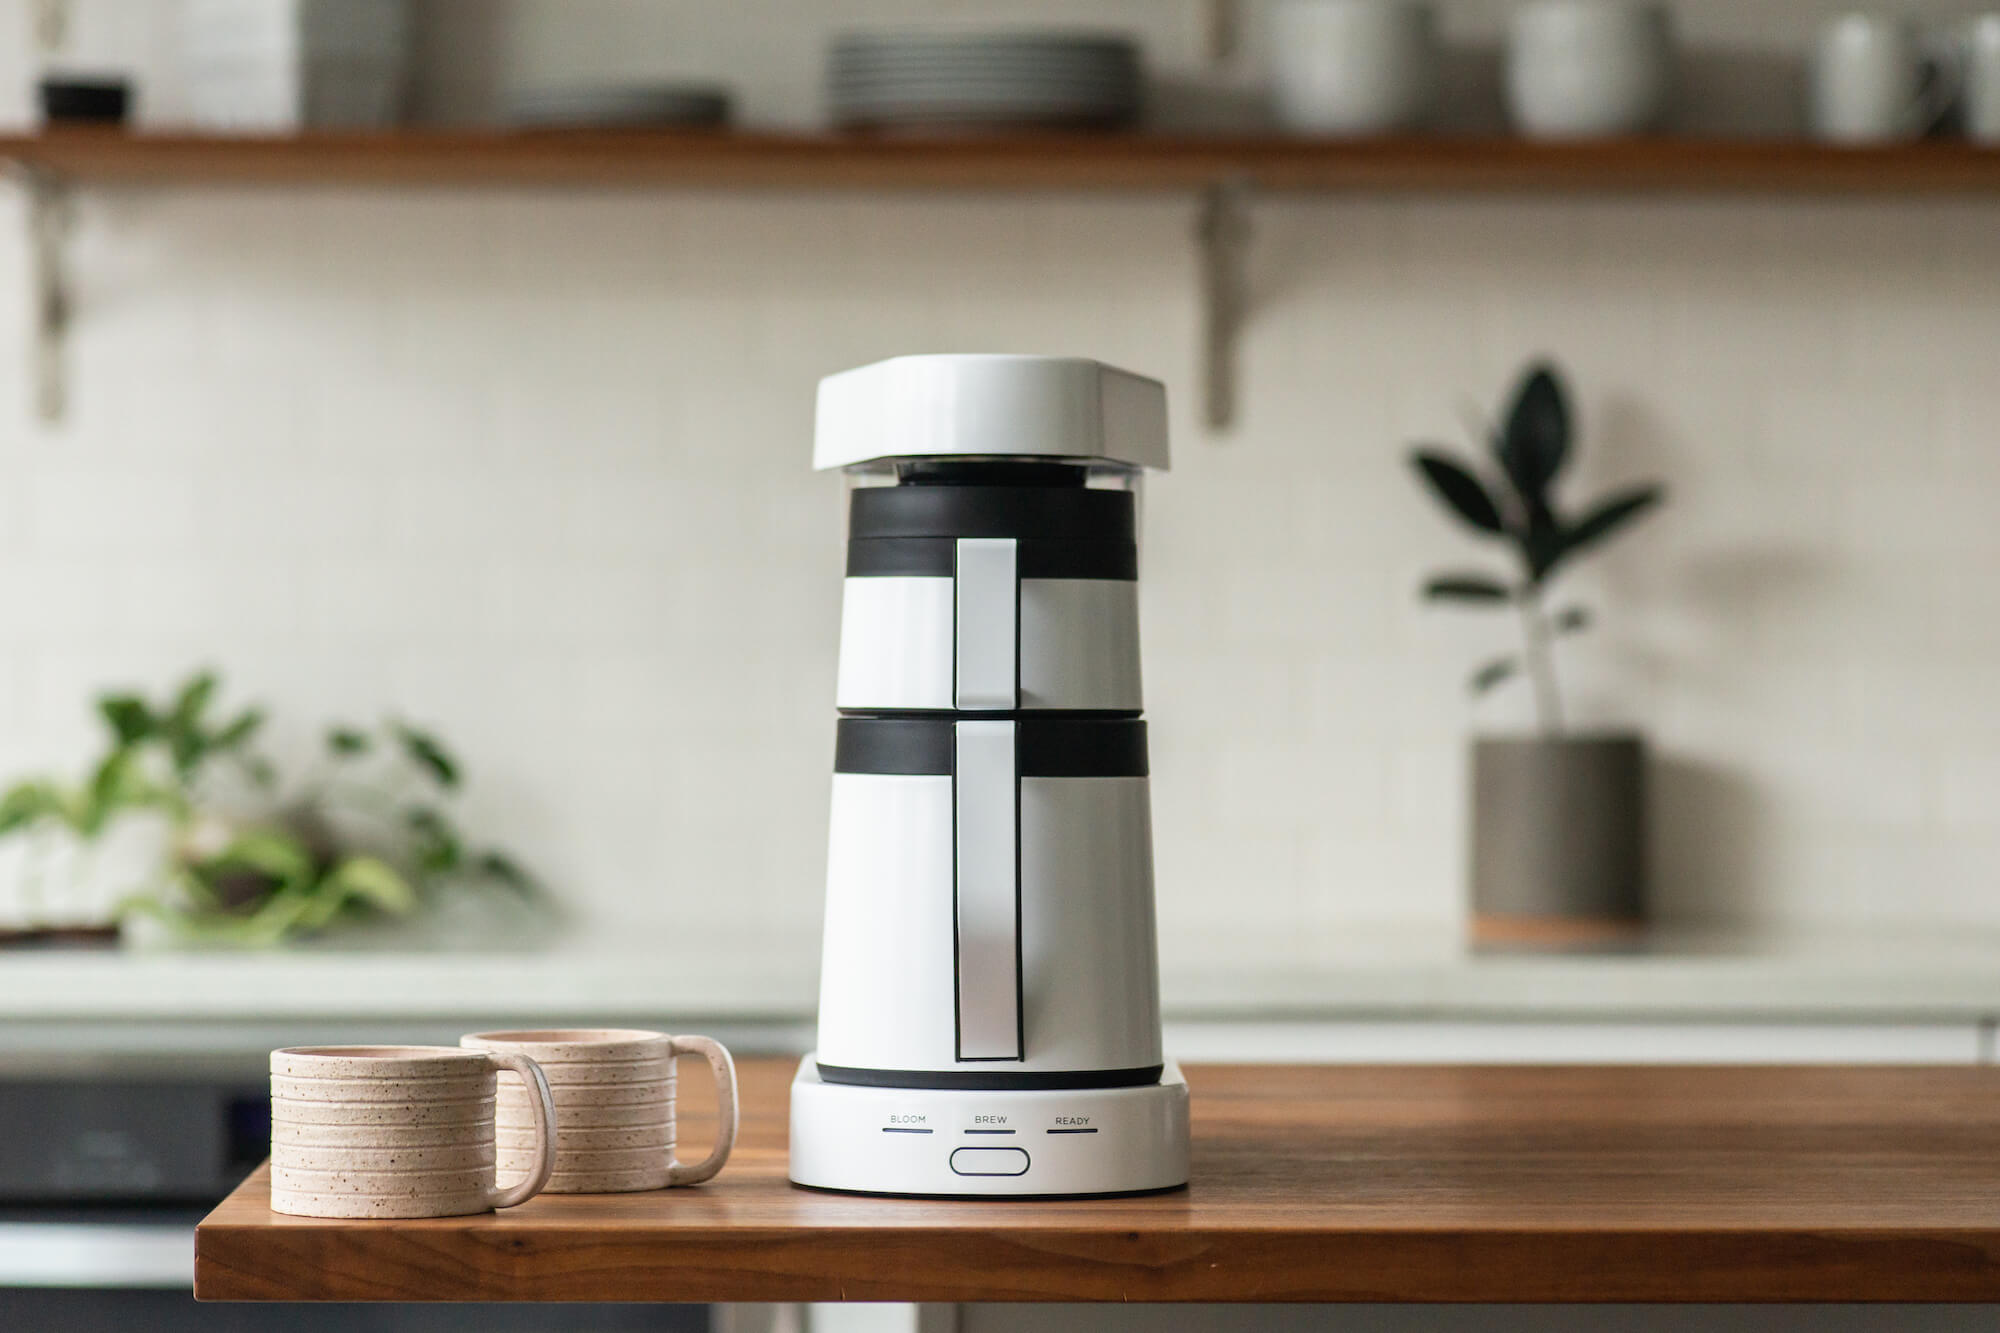 Ratio Six - The Best Coffee Maker for Home?